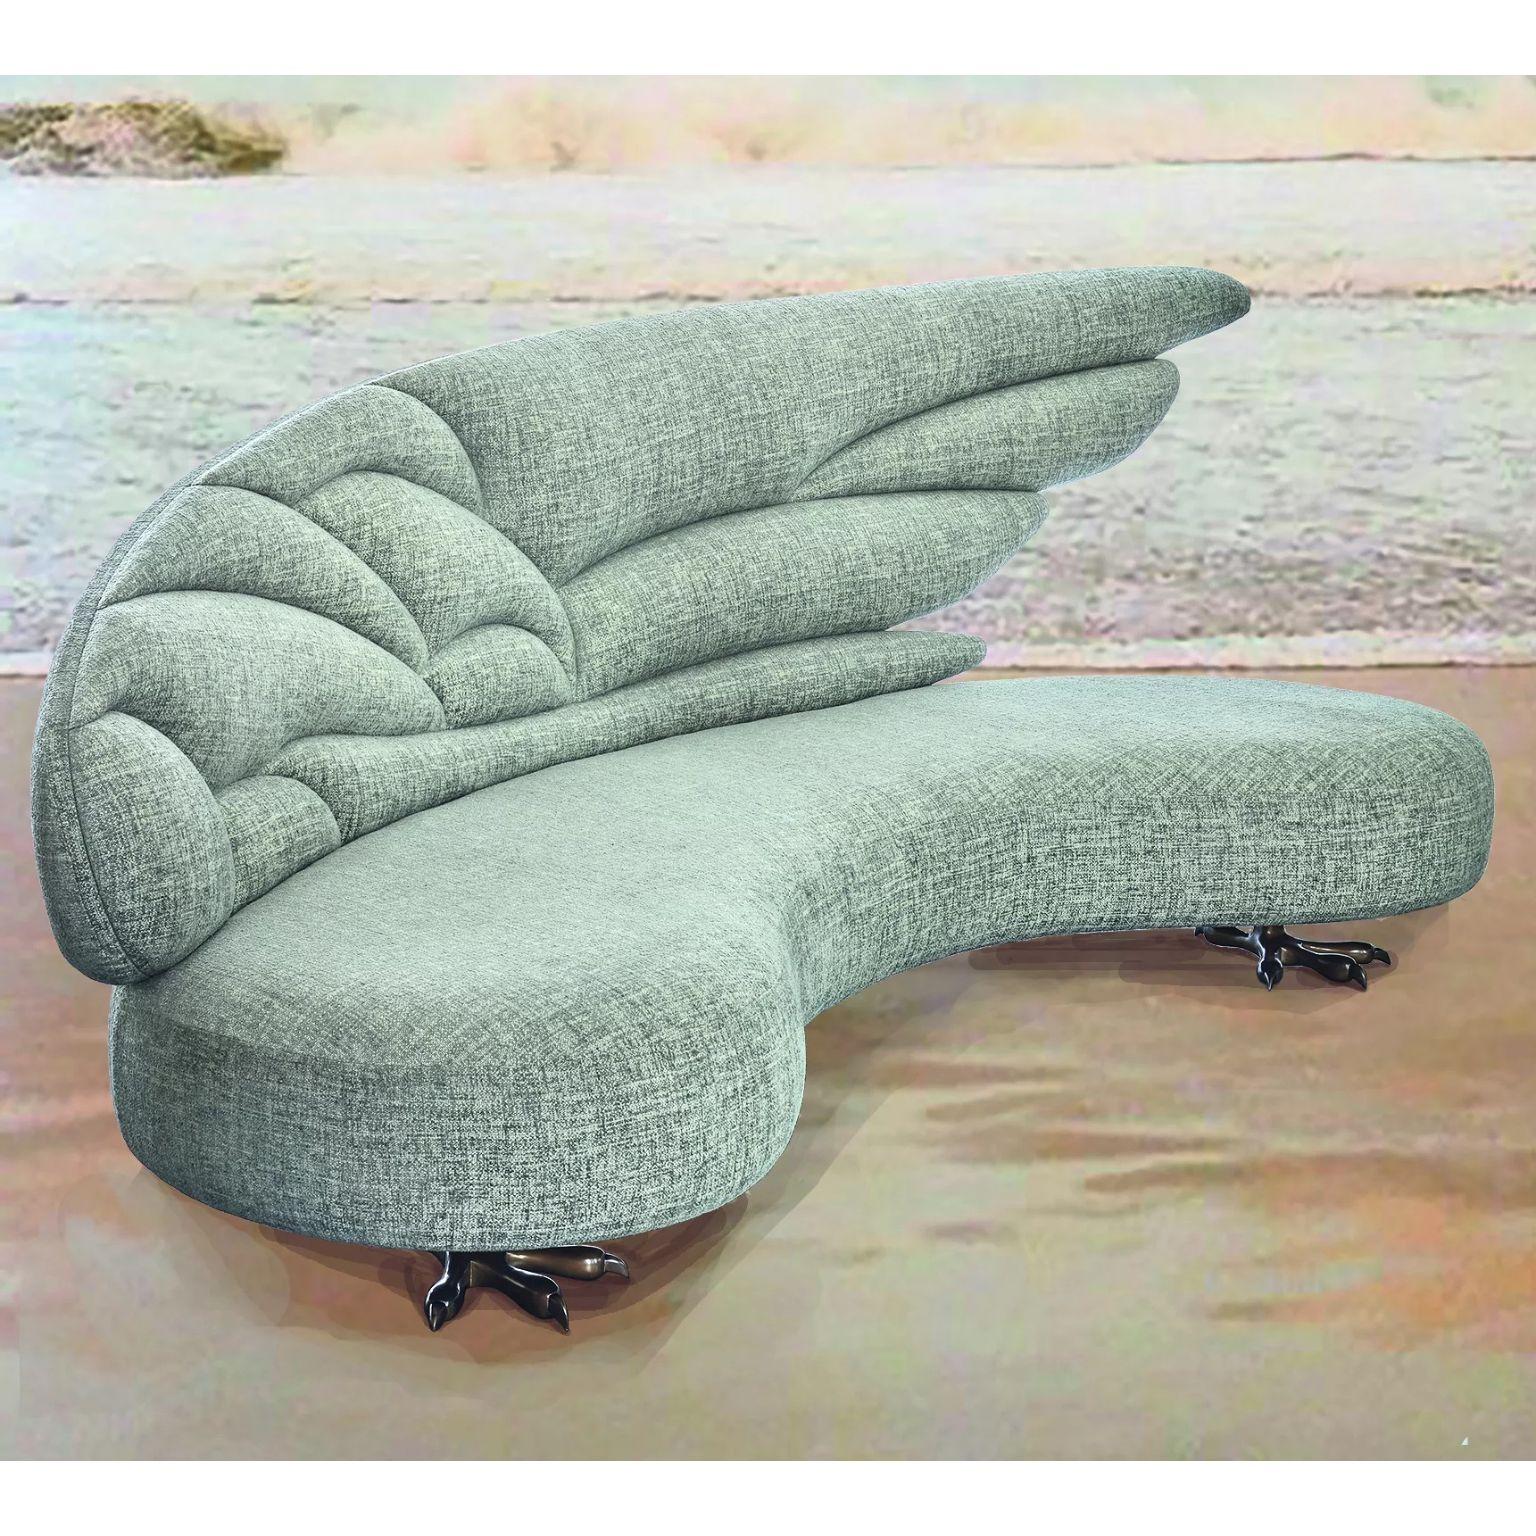 Zeus Grey Sofa by Emilie Lemardeley
Limited Edition of 8 pieces.
Dimensions: D 150 x W 280 x H 110 cm
Materials: Wood, foam and Giant fabric.

Designed as jewellery for the interior, the Lemardeley’s creations reflect French craftsmanship infused